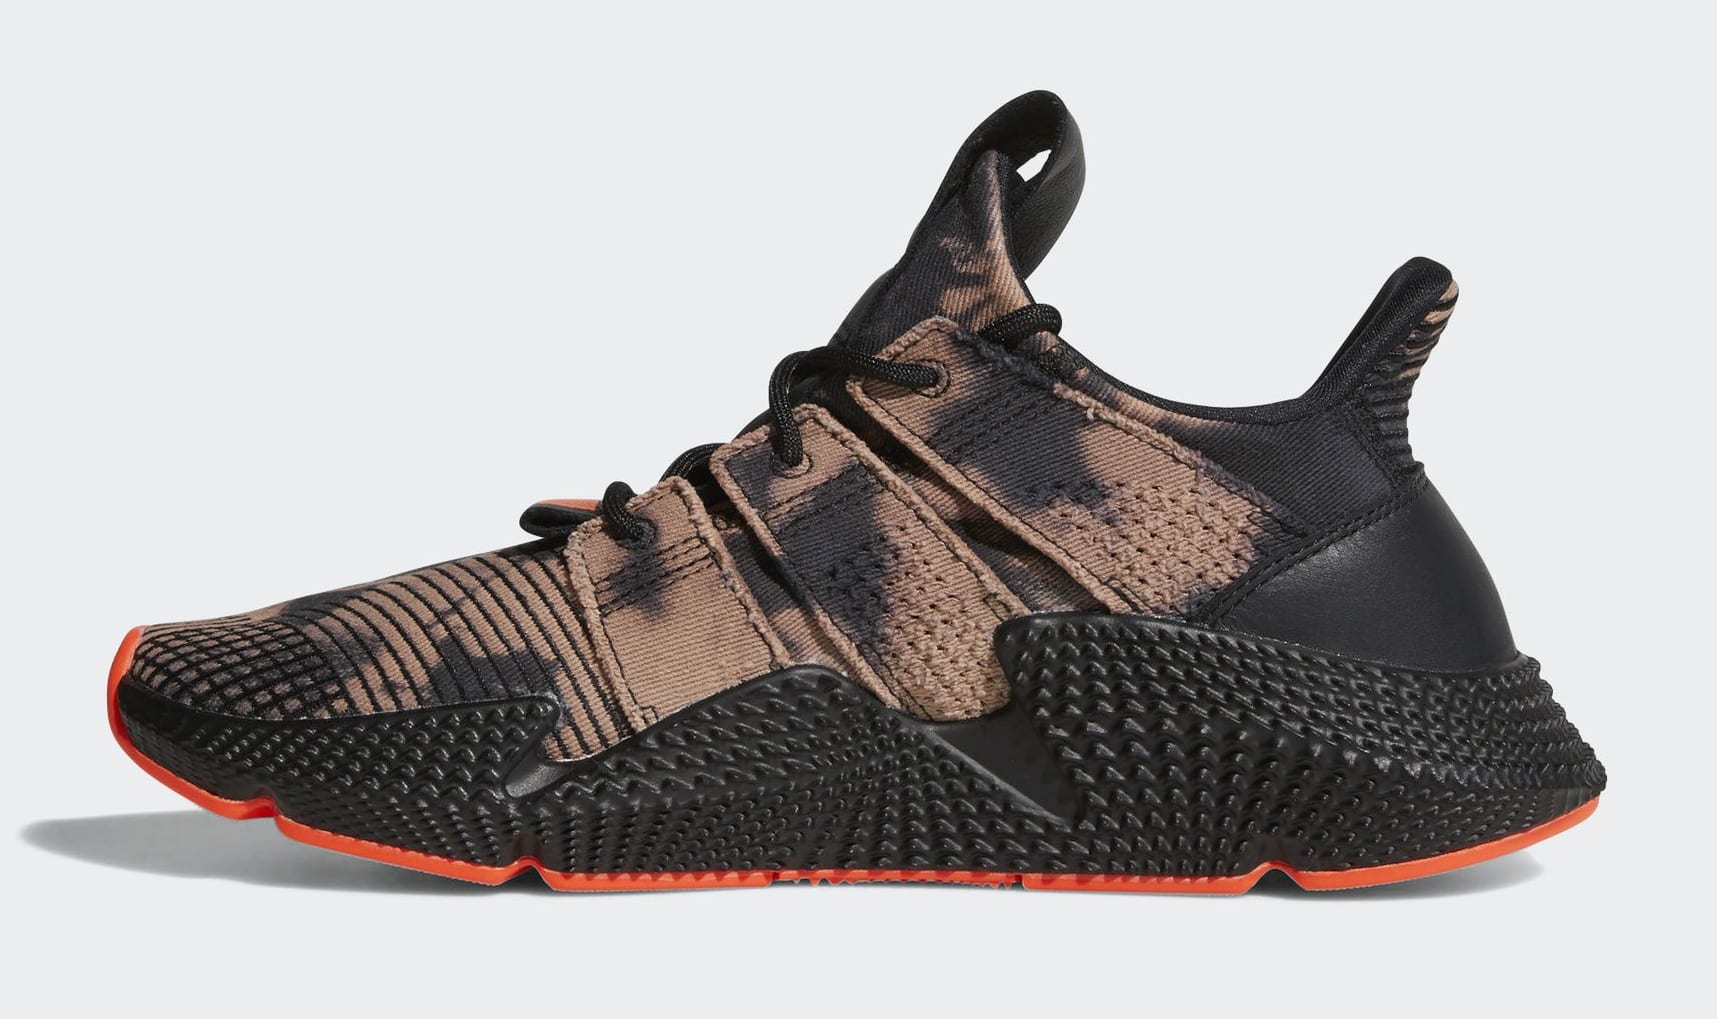 Adidas Prophere 'Bleached' Black/Solar Red Release | Sole Collector